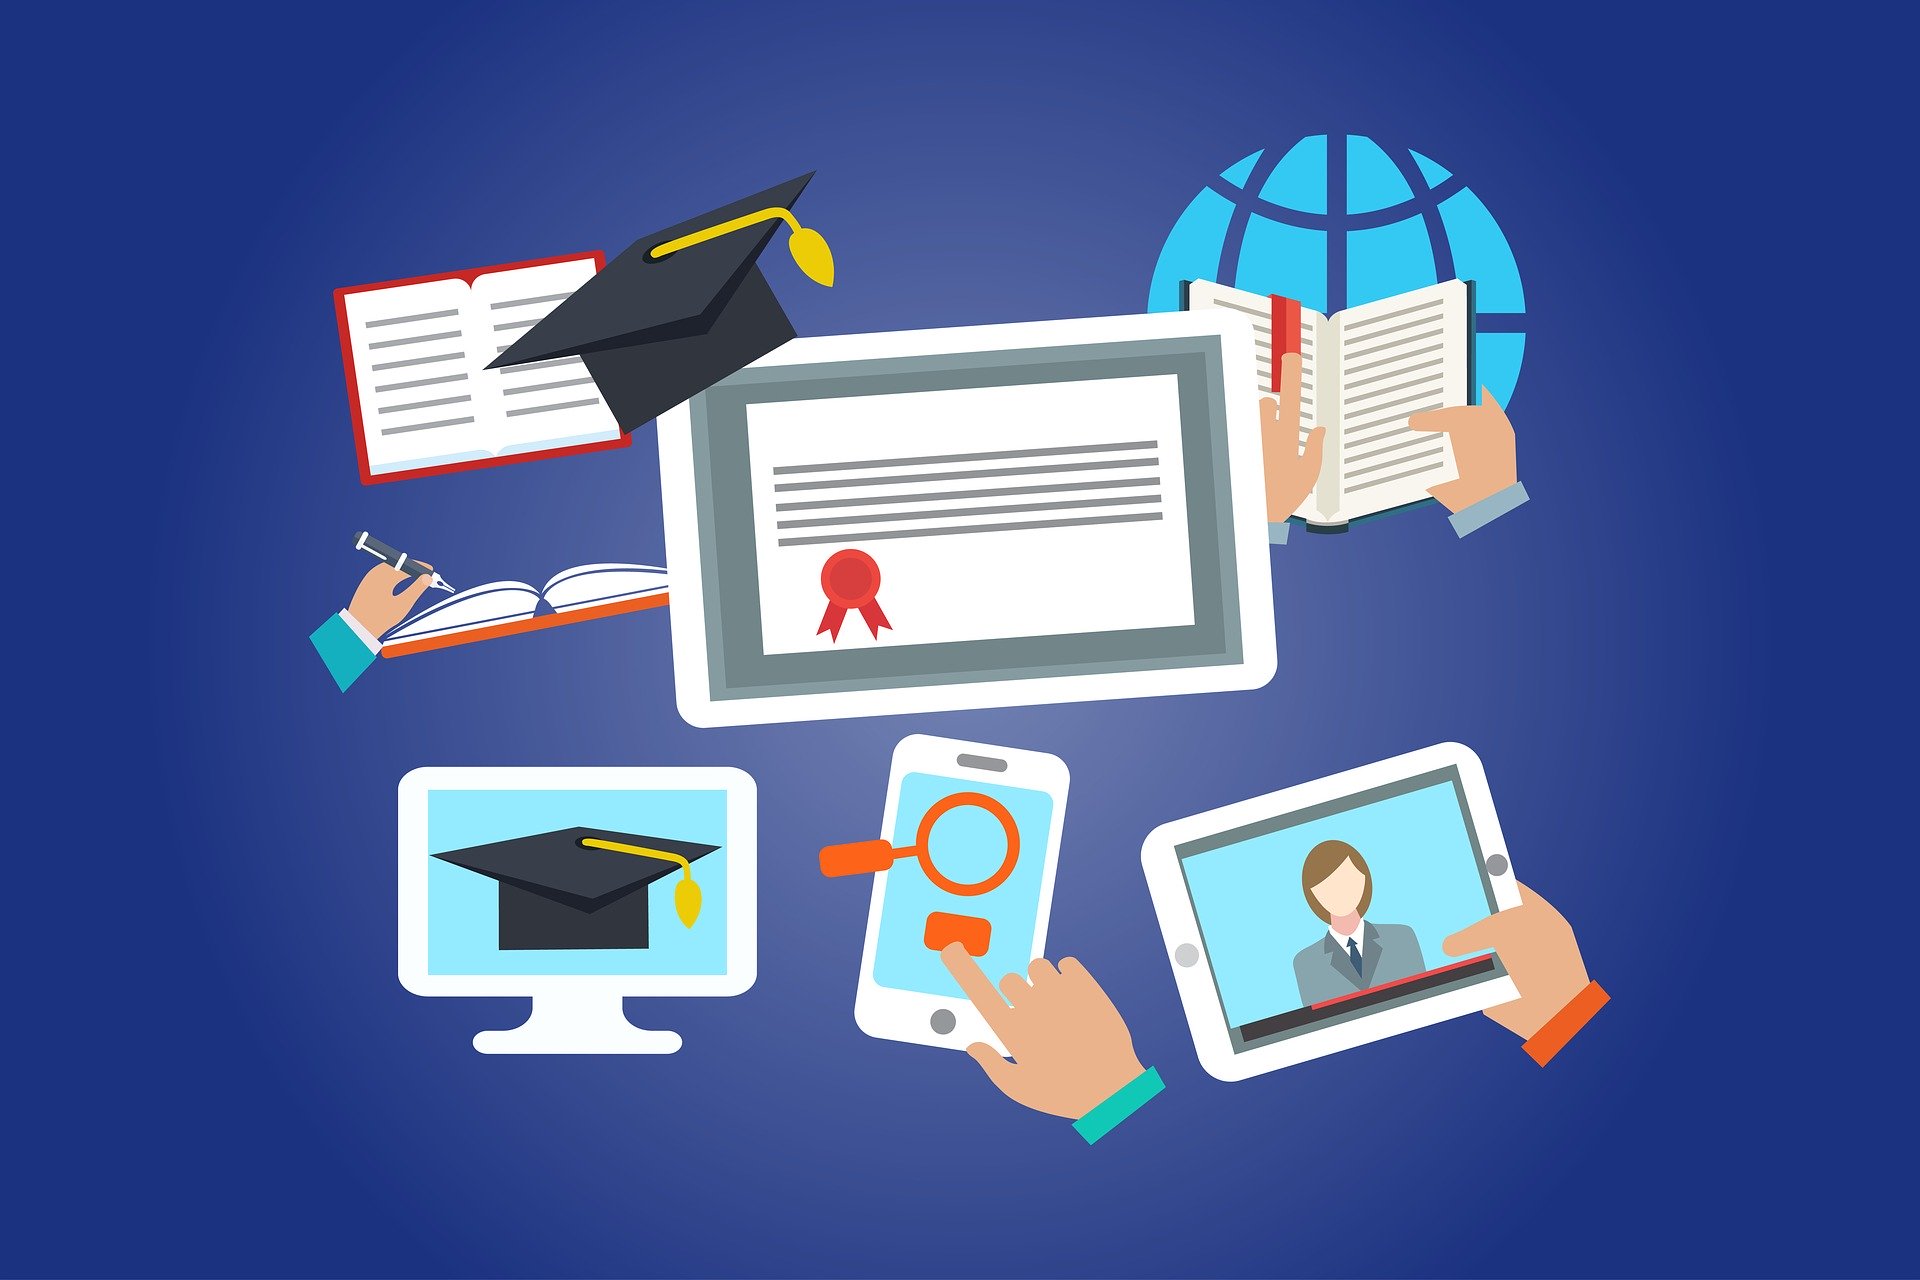 Various education and online learning elements like books, a graduation cap, a diploma, a globe, and digital devices, representing the concept of global online education and e-learning.